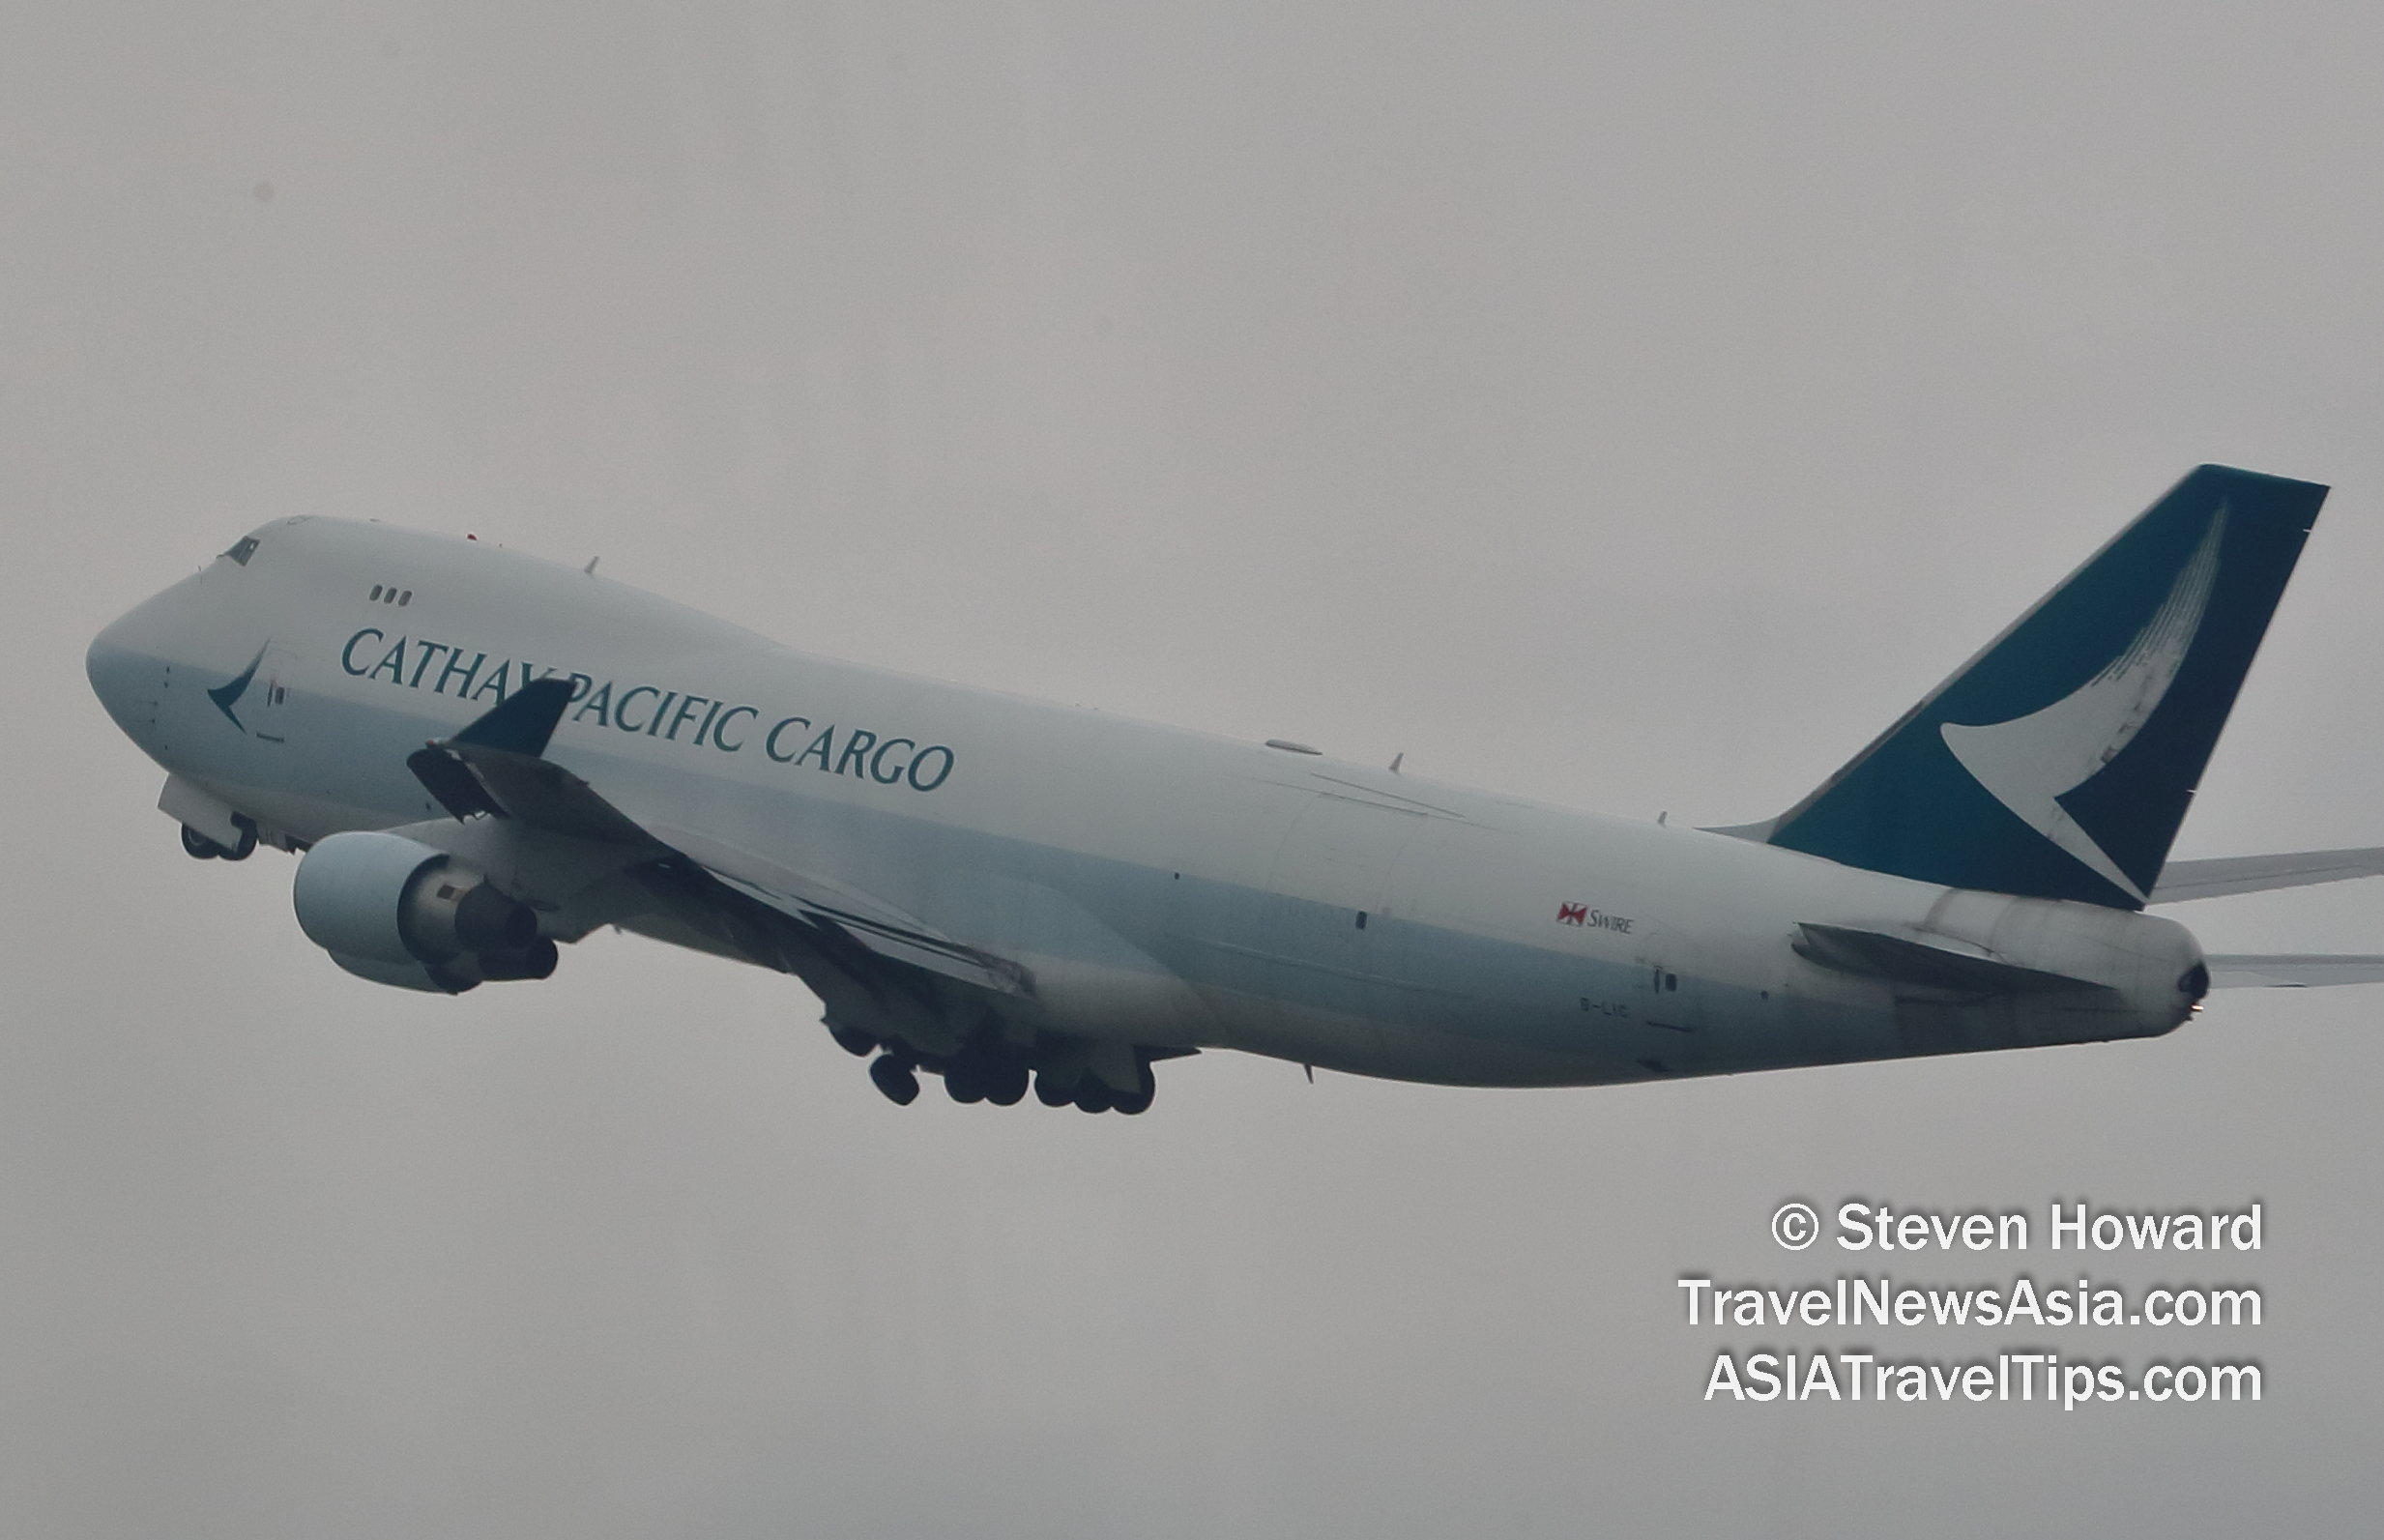 Cathay Pacific Boeing 747-4F B-LIC. Picture by Steven Howard of TravelNewsAsia.com Click to enlarge.